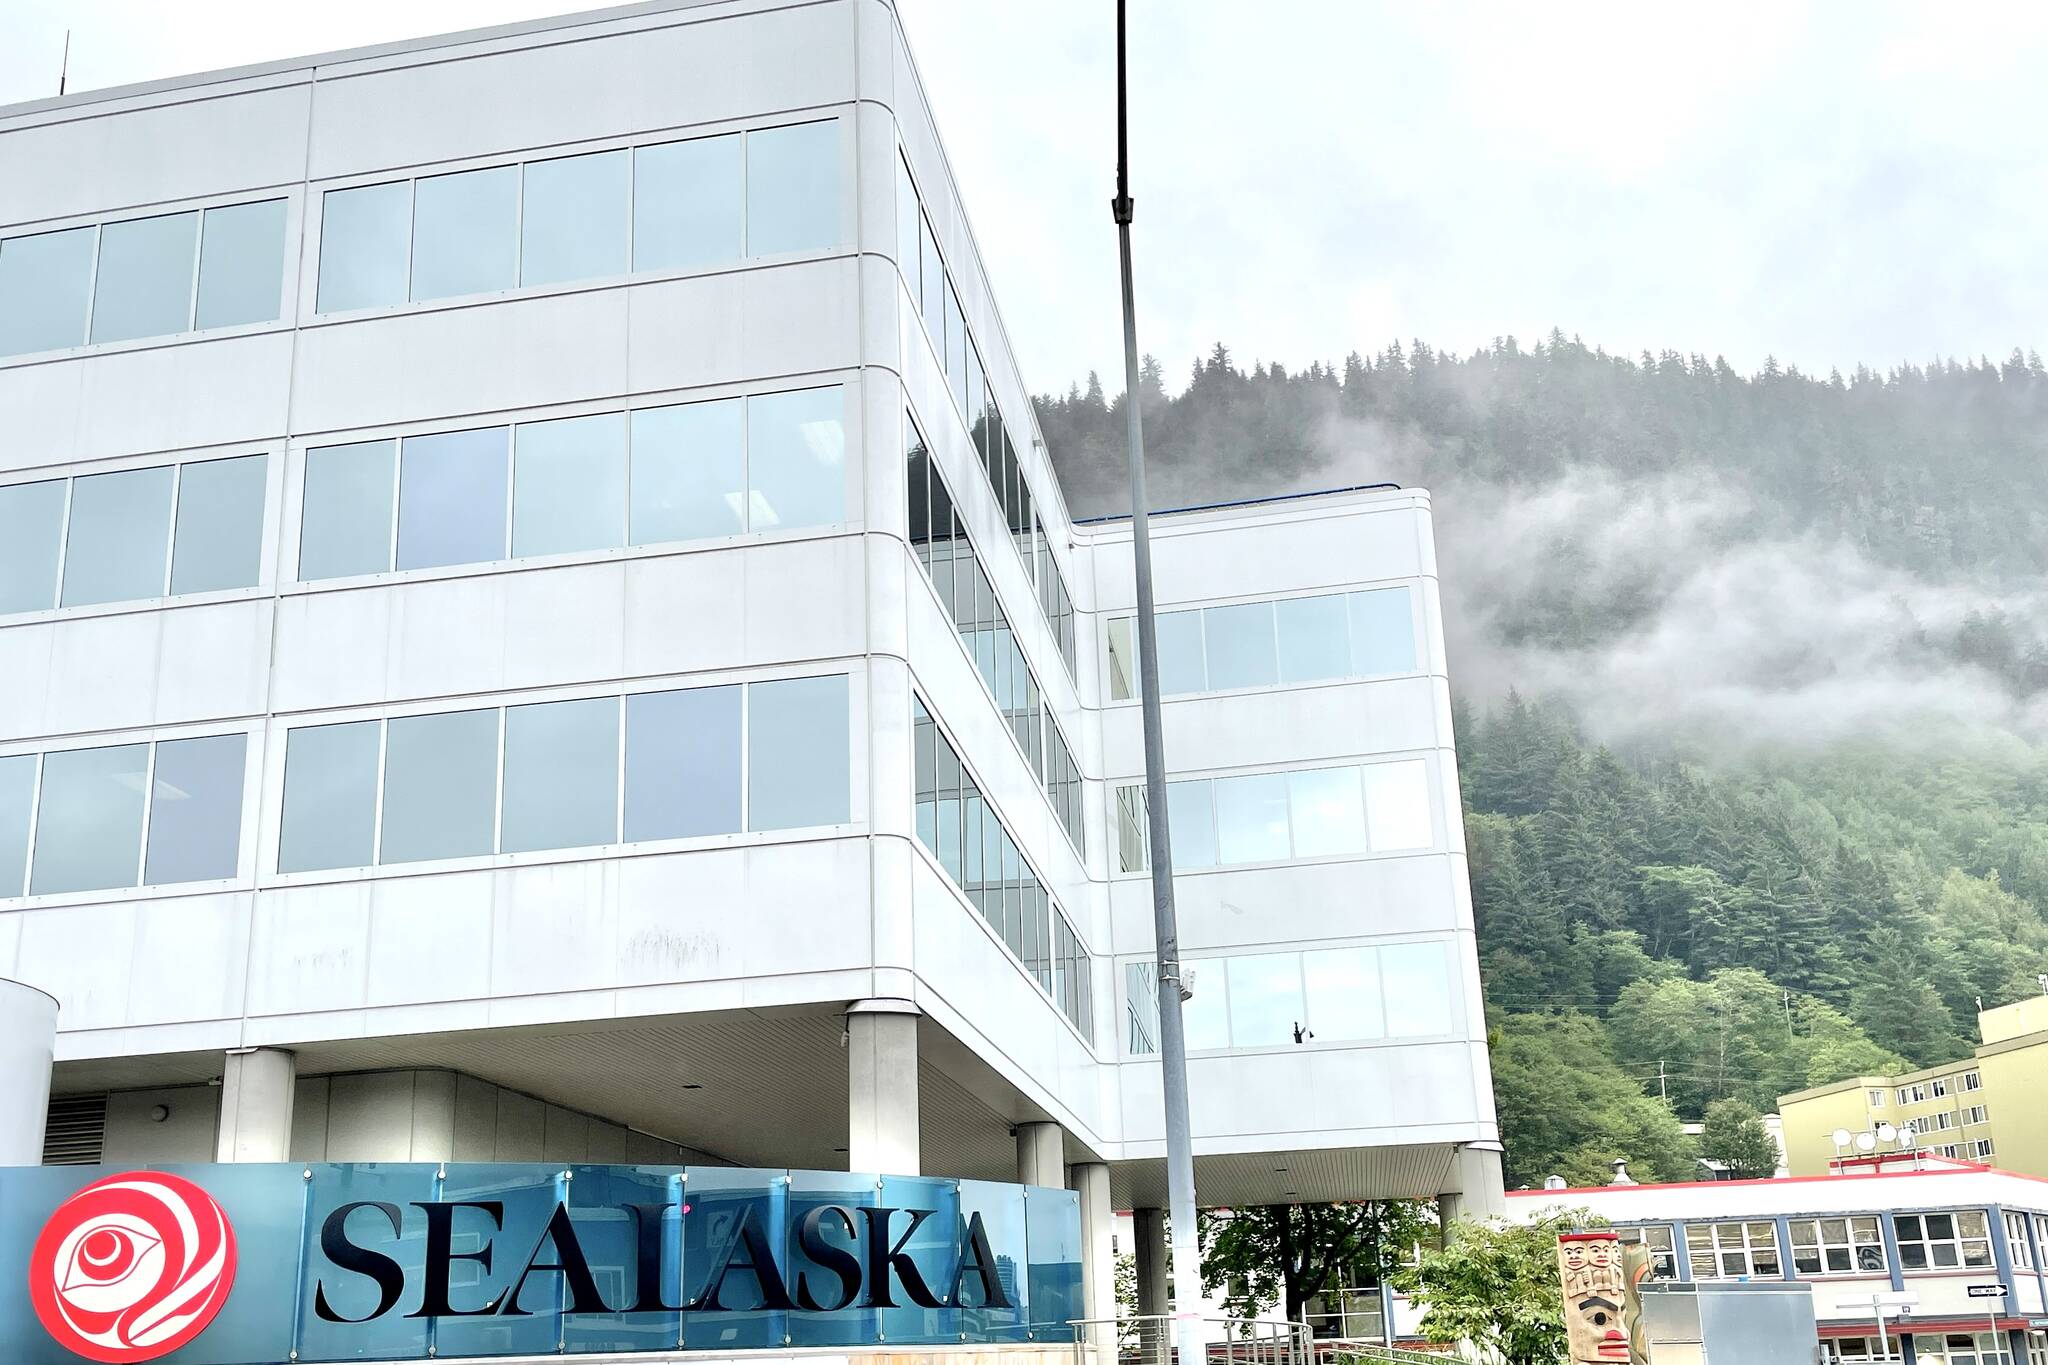 Apple and Sealaska Corp. announced Thursday they’d be one of several companies partnering as part of an Apple program to assist minority-owned companies in advancing environmental agendas. (Michael S. Lockett / Juneau Empire)